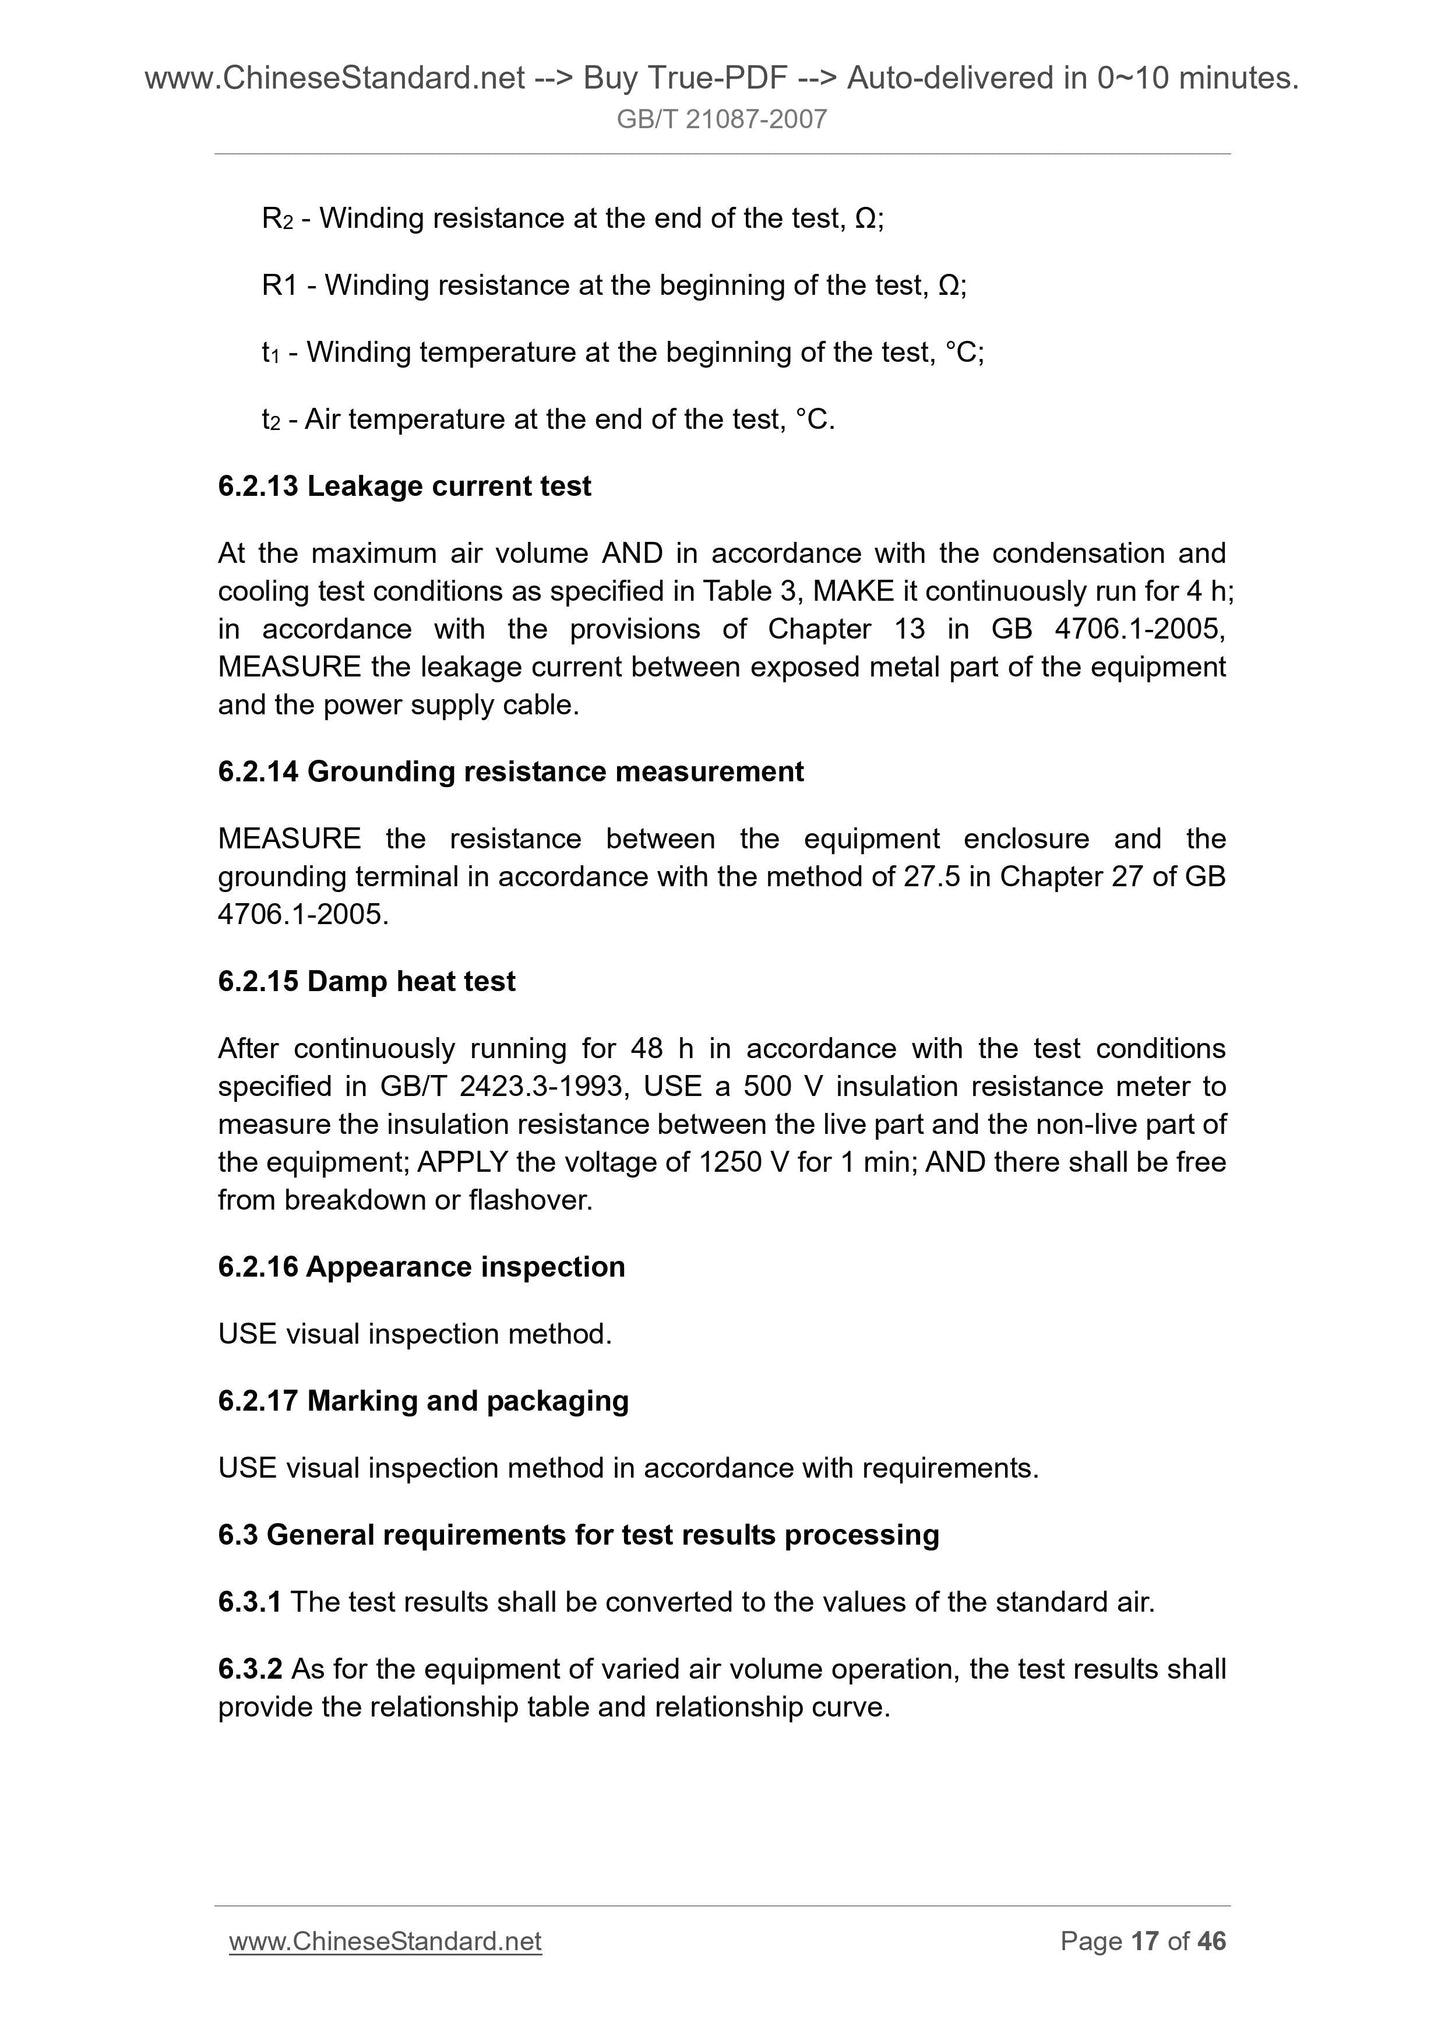 GB/T 21087-2007 Page 11